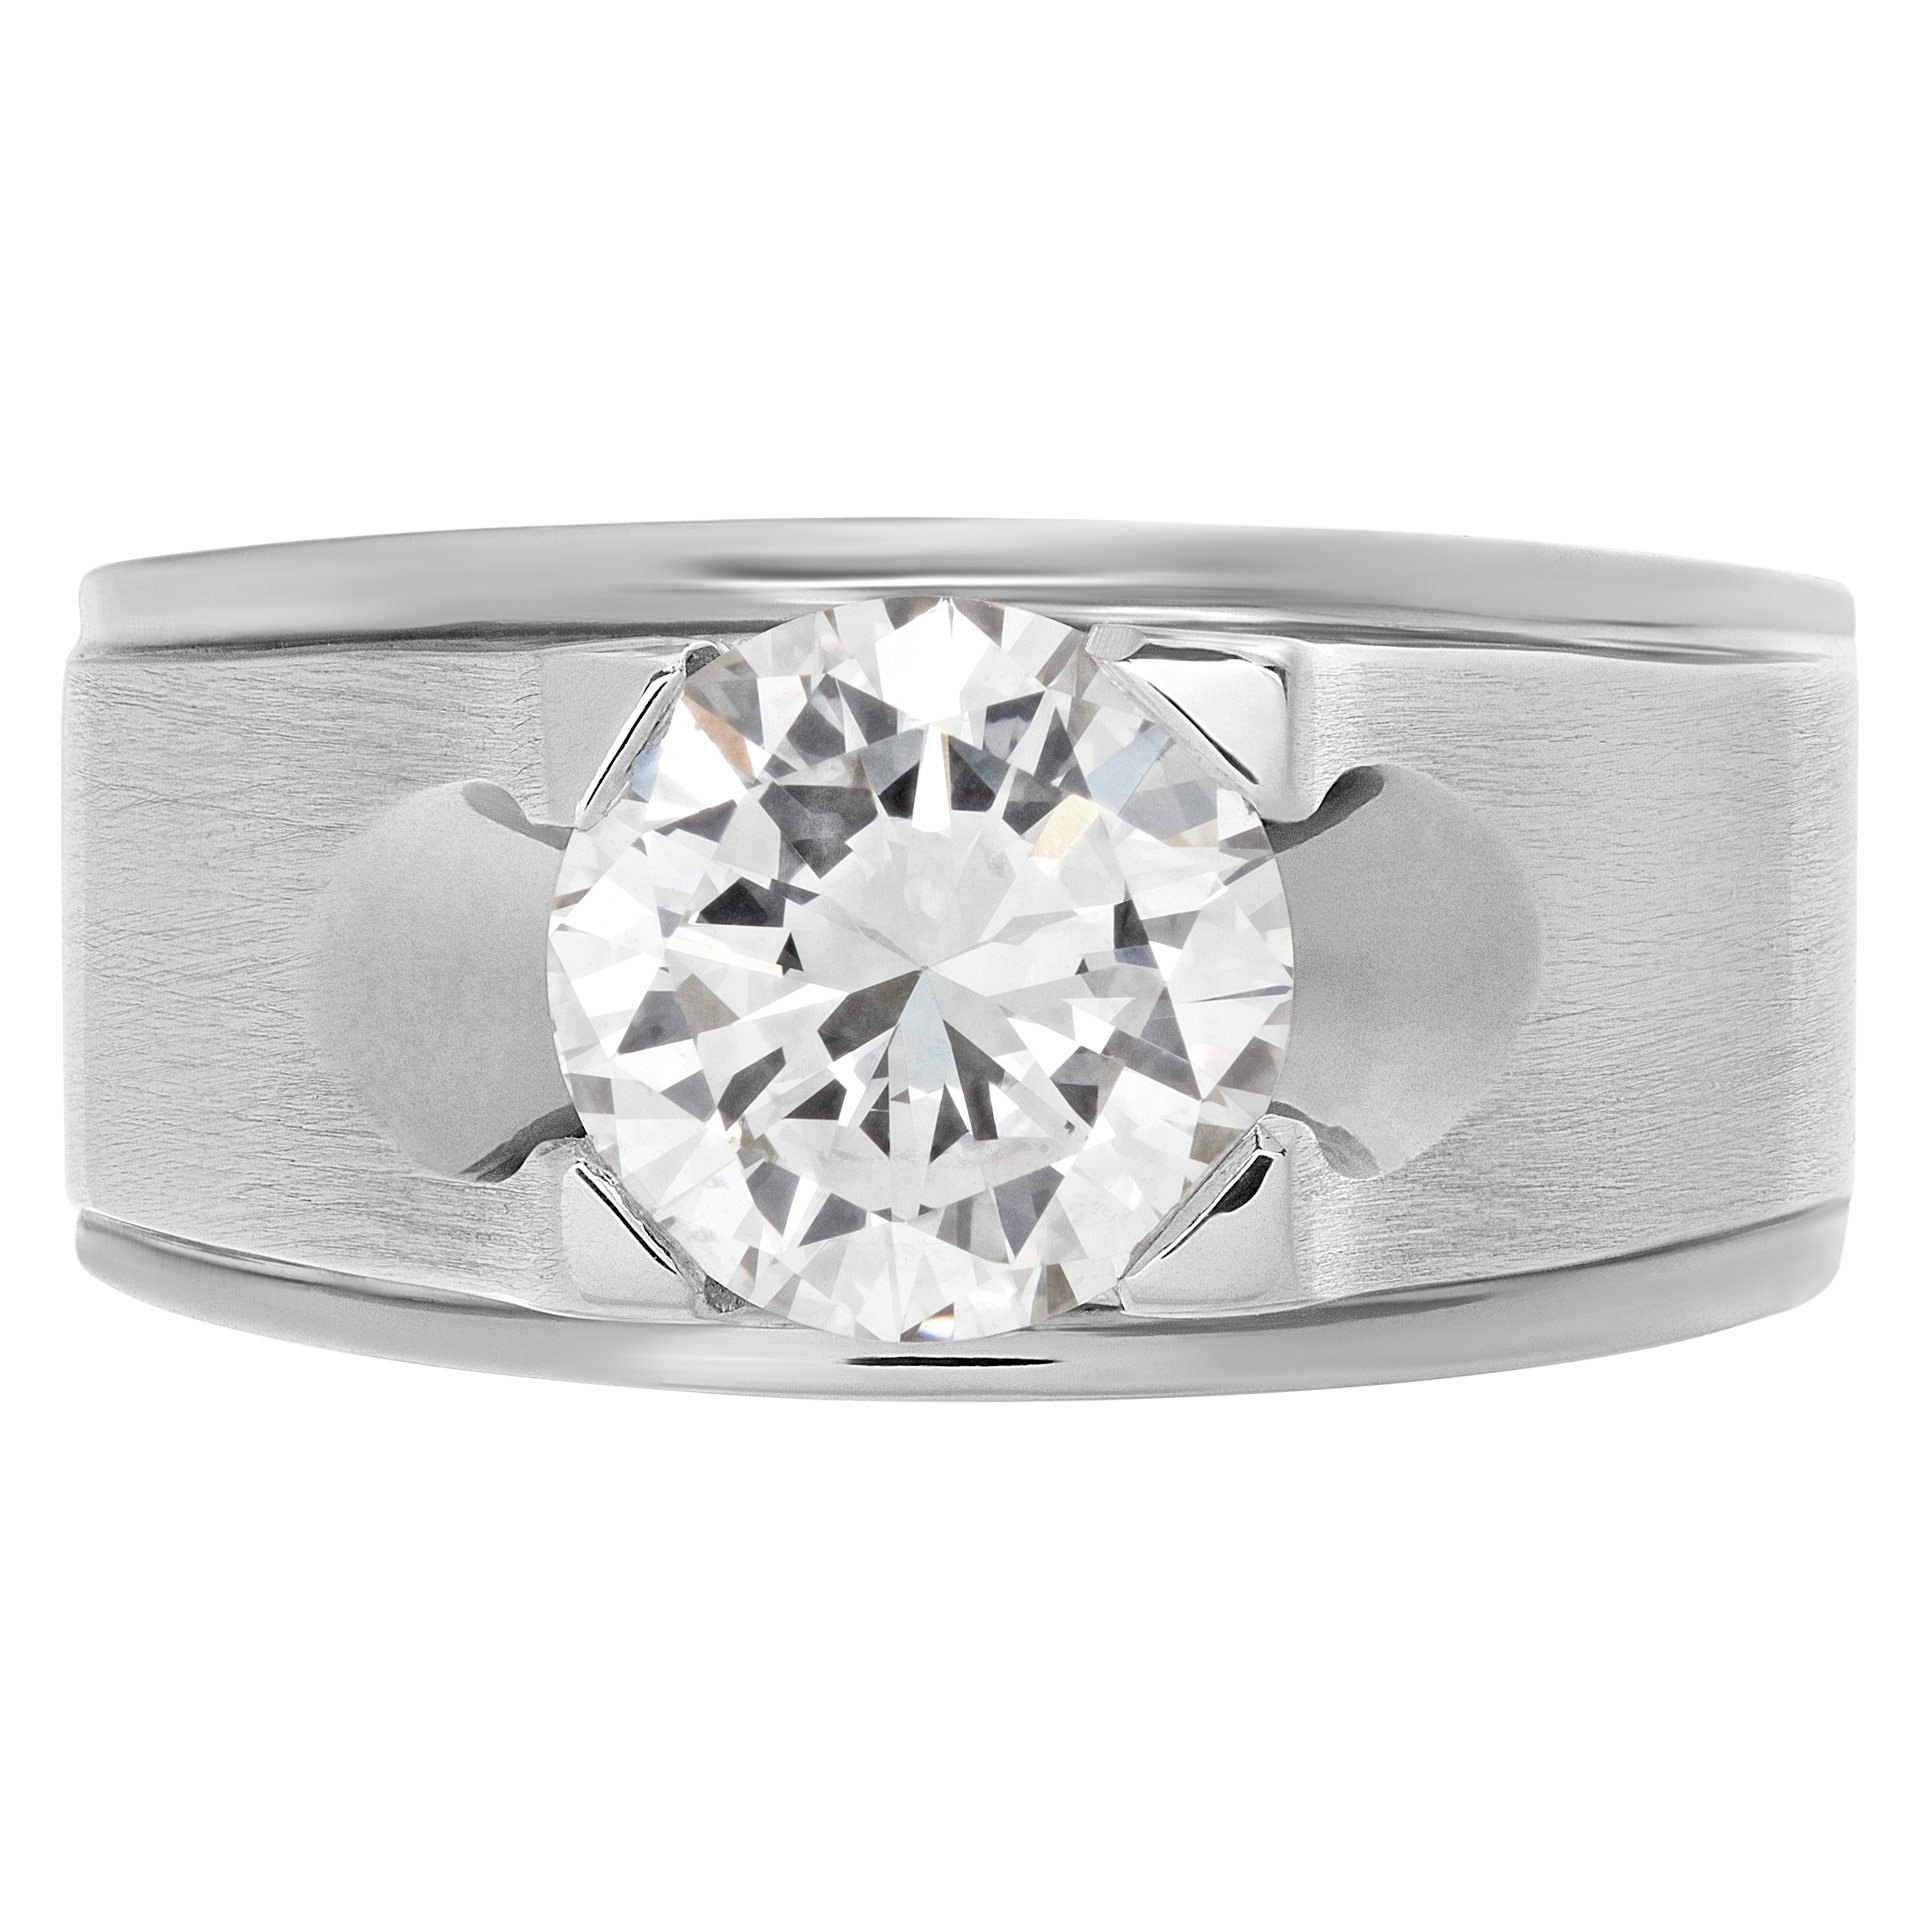 GIA certified 2.01 carat (K color, VVS2 clarity) round brilliant cut diamond in an 18k white gold Gypsy setting.